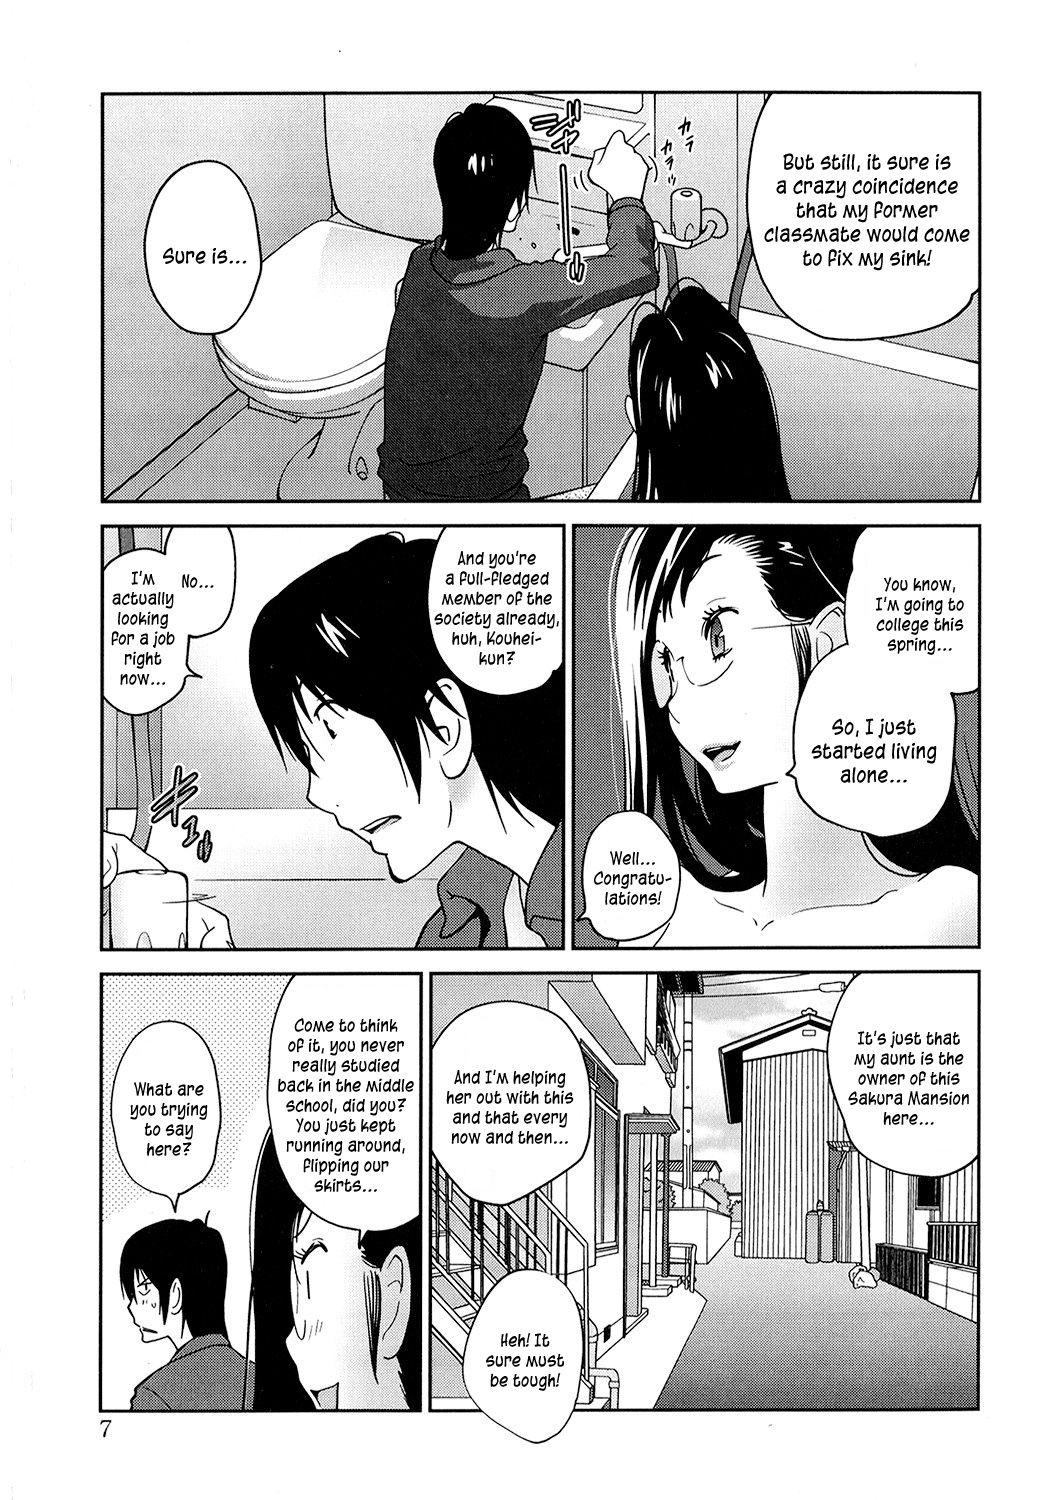 Best Blowjobs Ever Anoko to Apaman Stepmom - Page 7